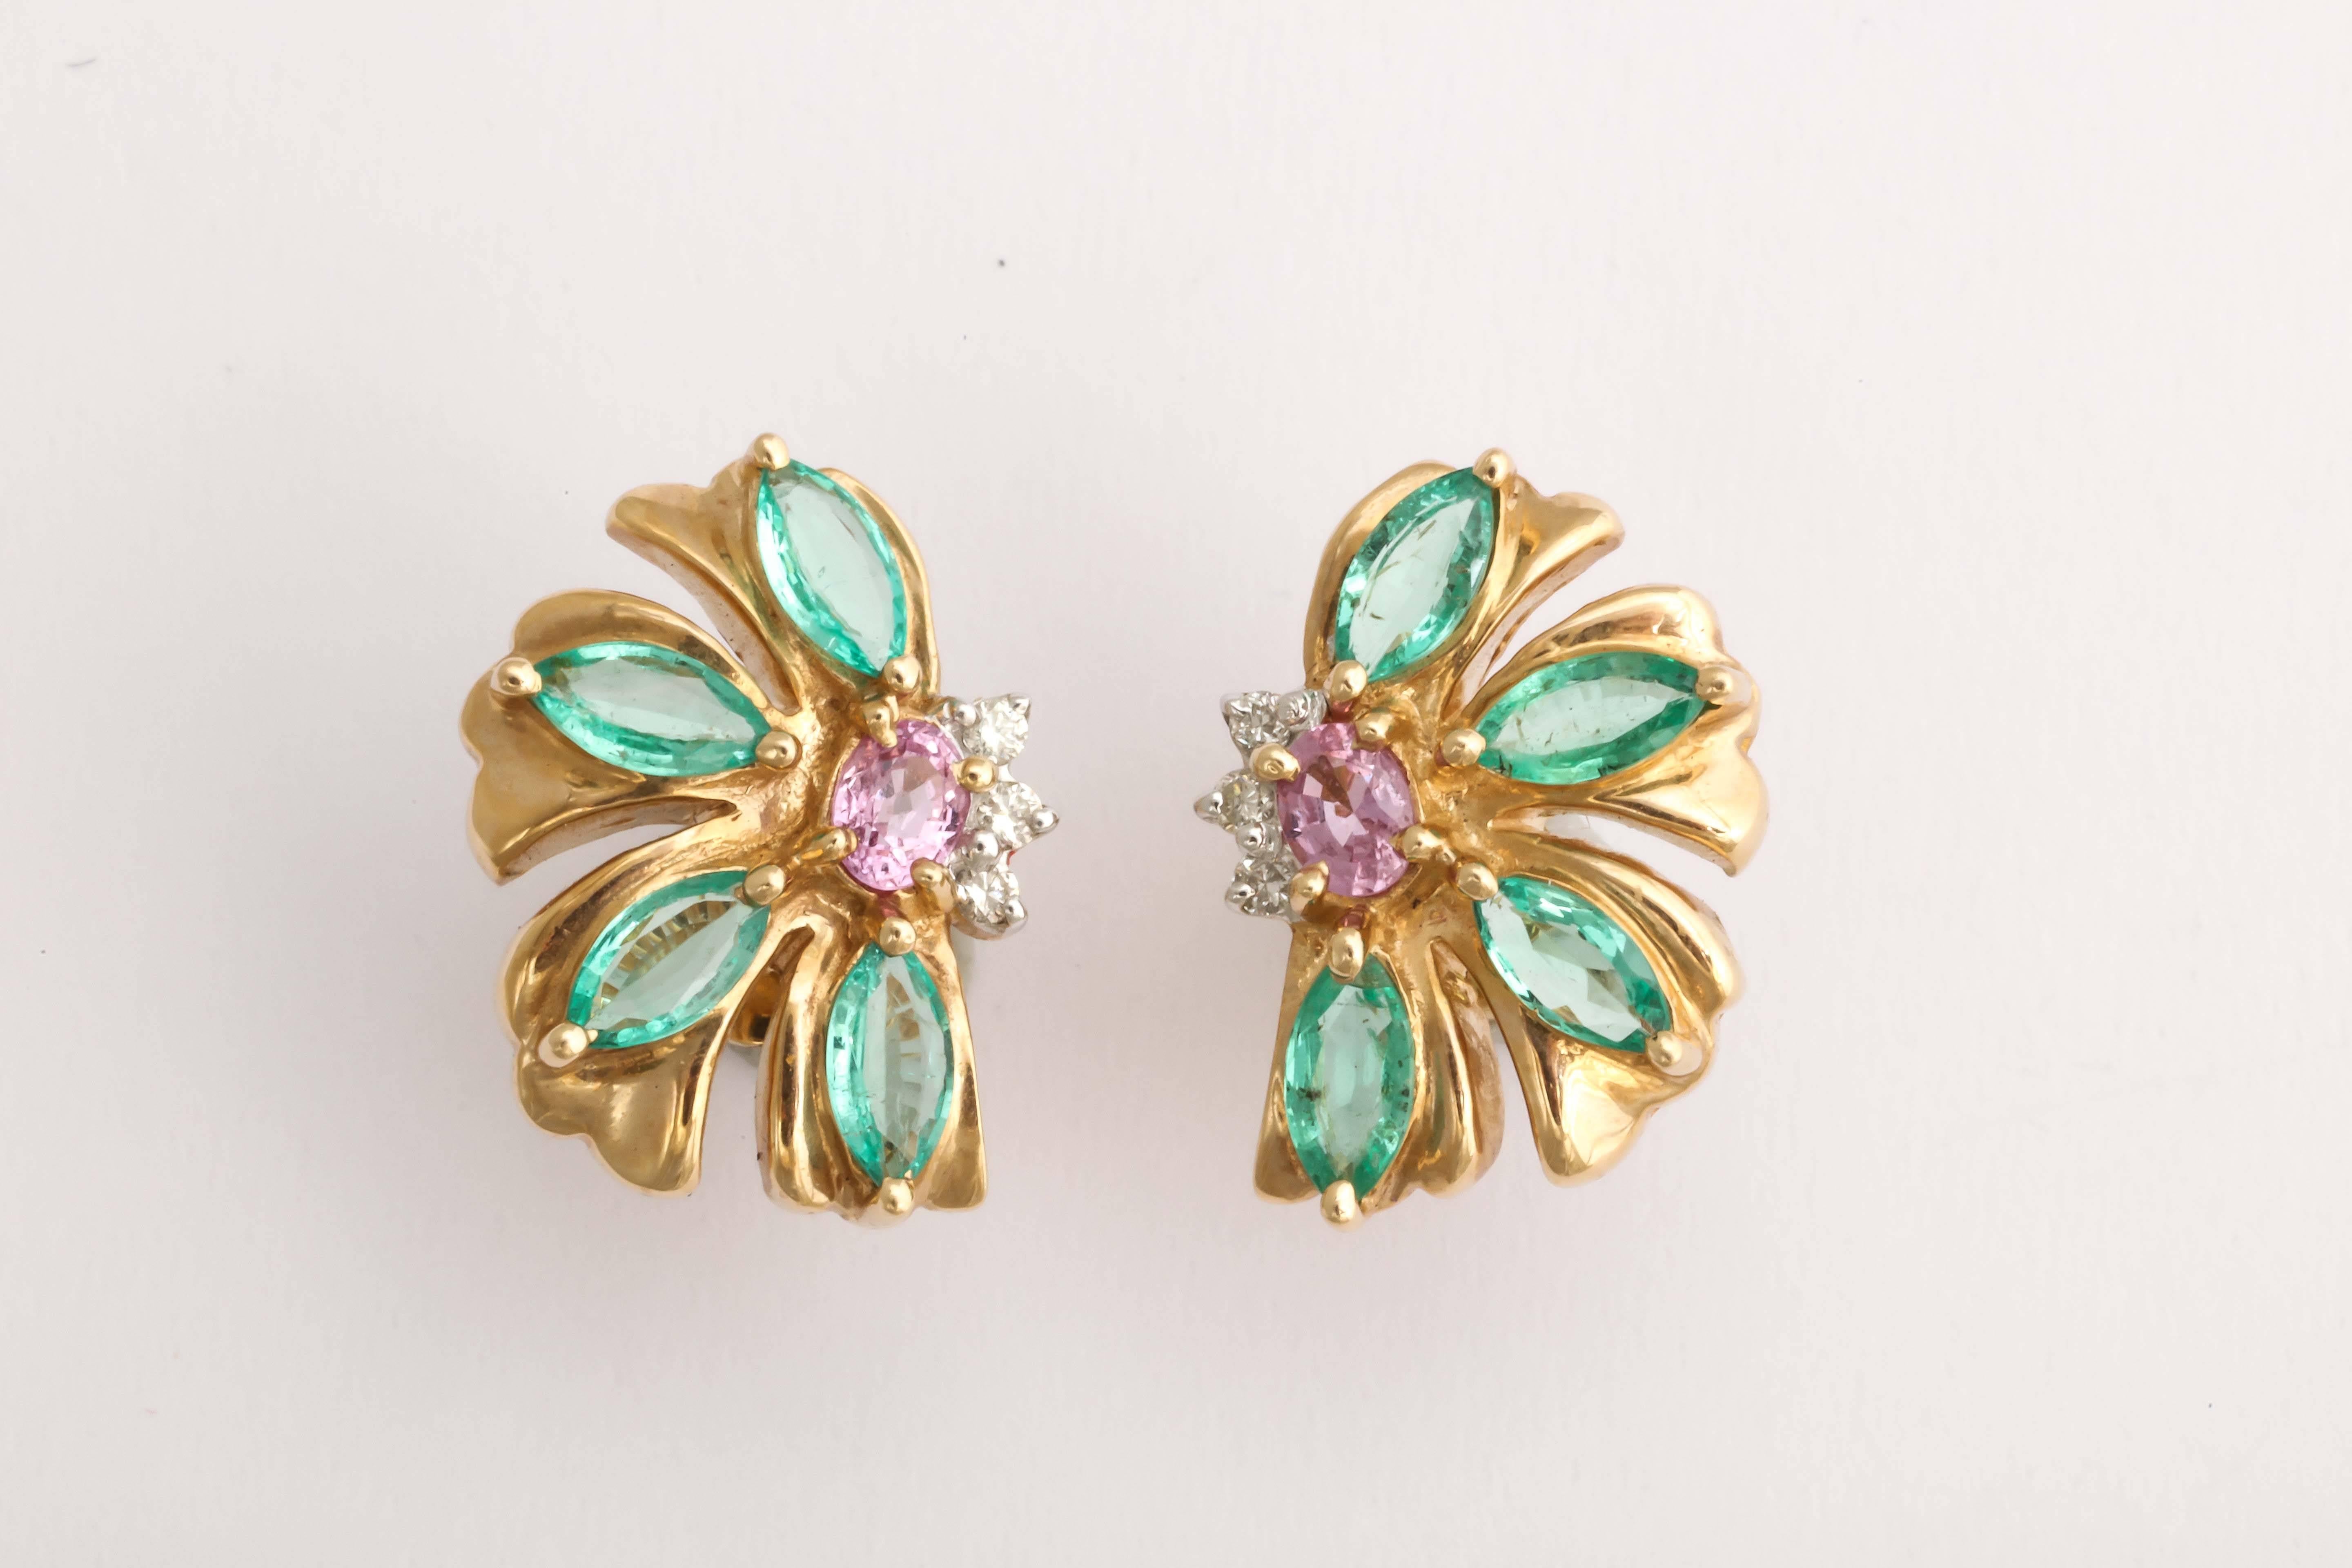 These earrings are a beautiful color combination, the classical green and pink, accented by sparkling diamonds and bold 14 kt yellow gold. The design is asymetrical and frames the face.